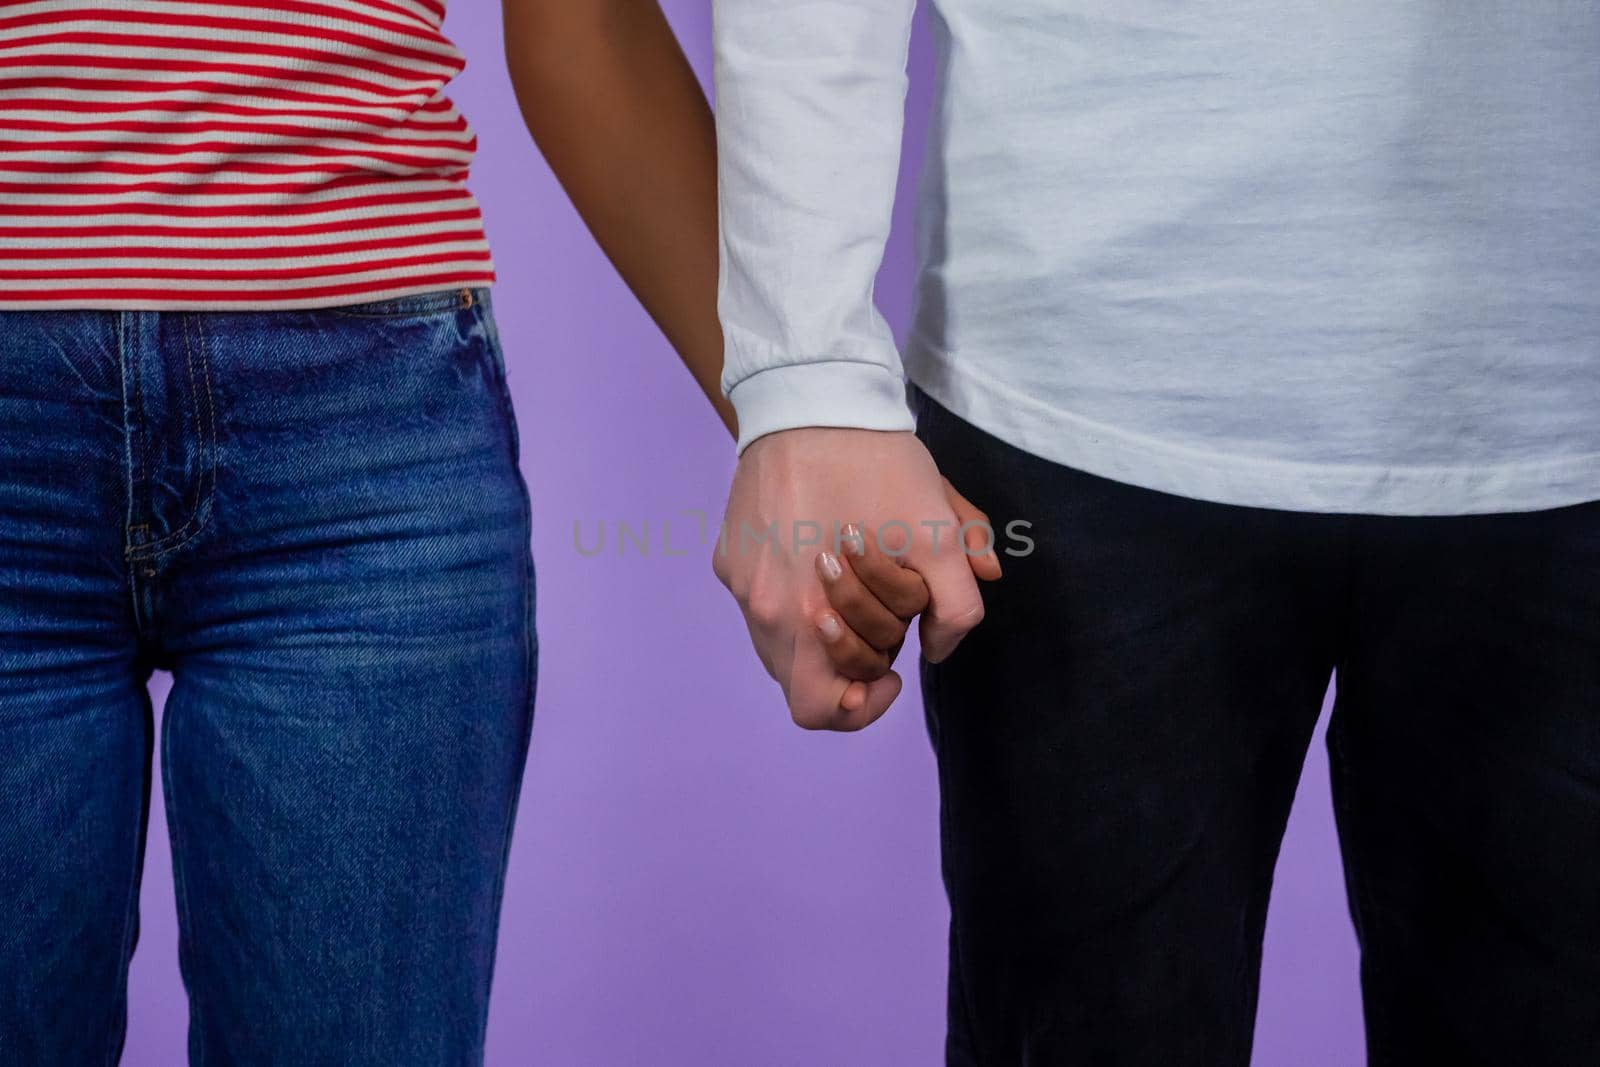 Hands of black woman and white man. Handshake close-up. Interracial friendship, anti-racism, fraternity, cooperation concept. Isolated on purple studio background. Ethnic diversity - Racial equality